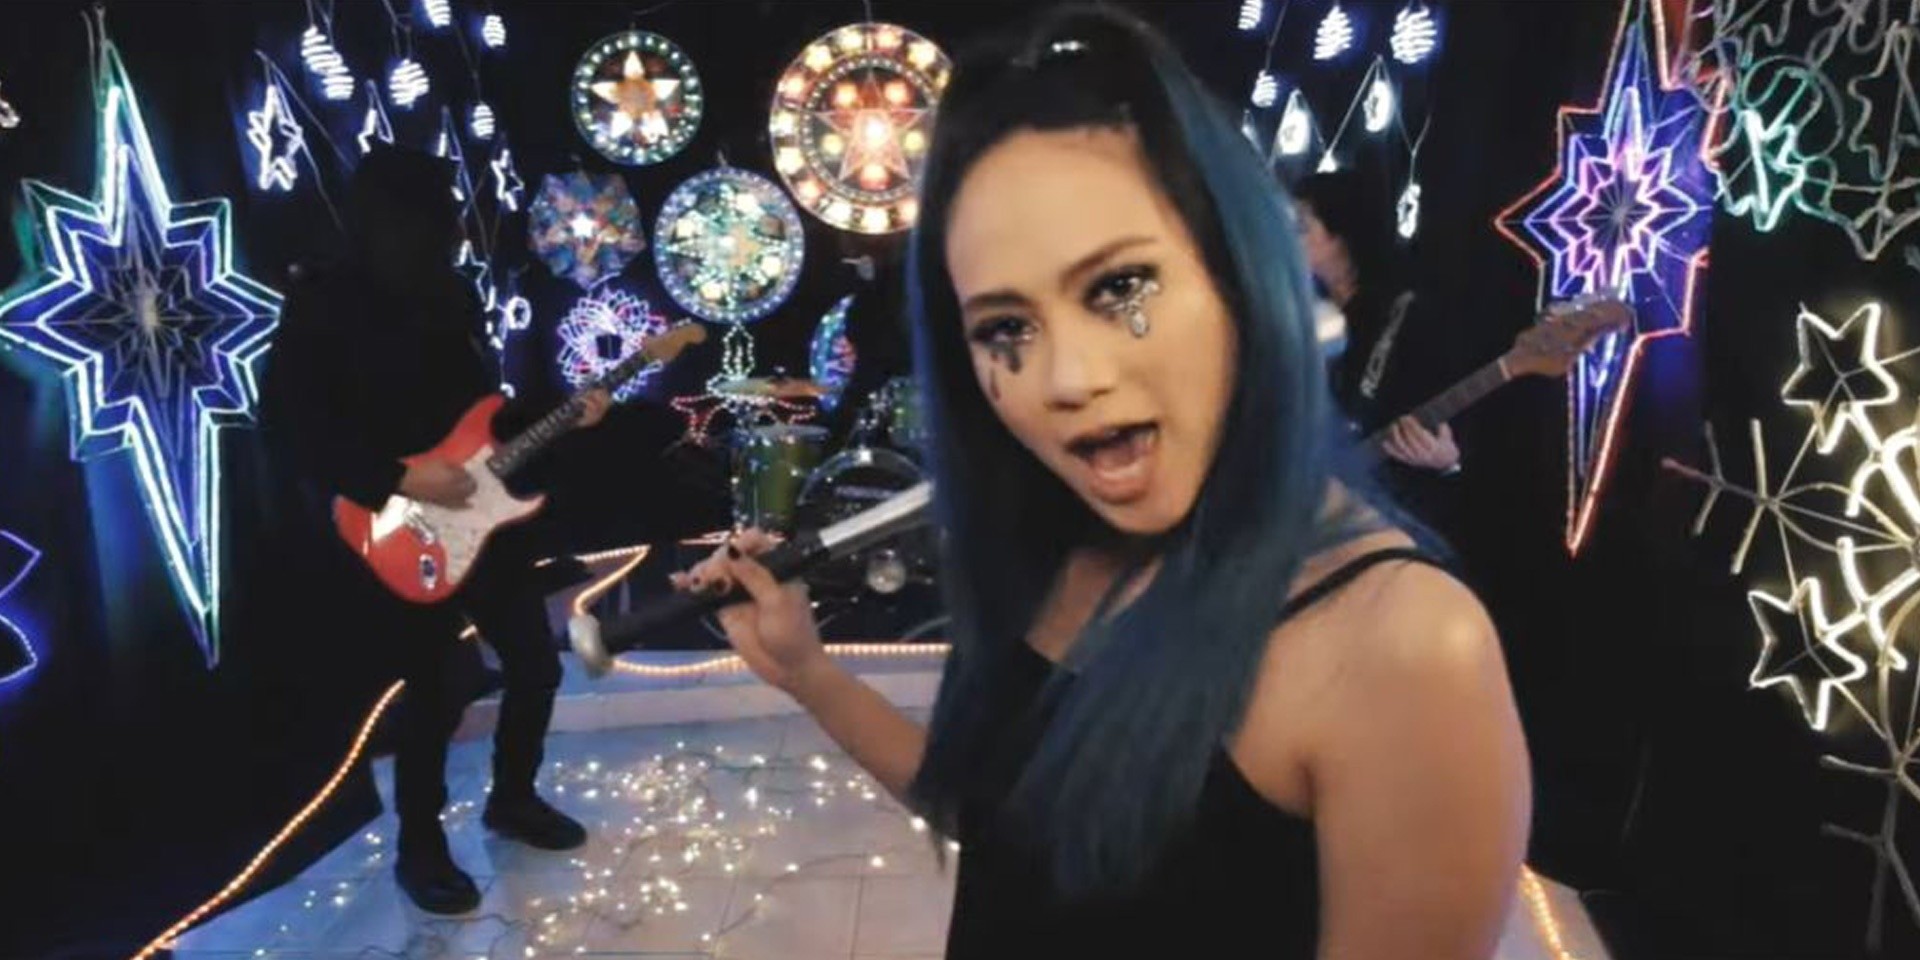 Gracenote are out for revenge in new 'Christmas Break' music video – watch